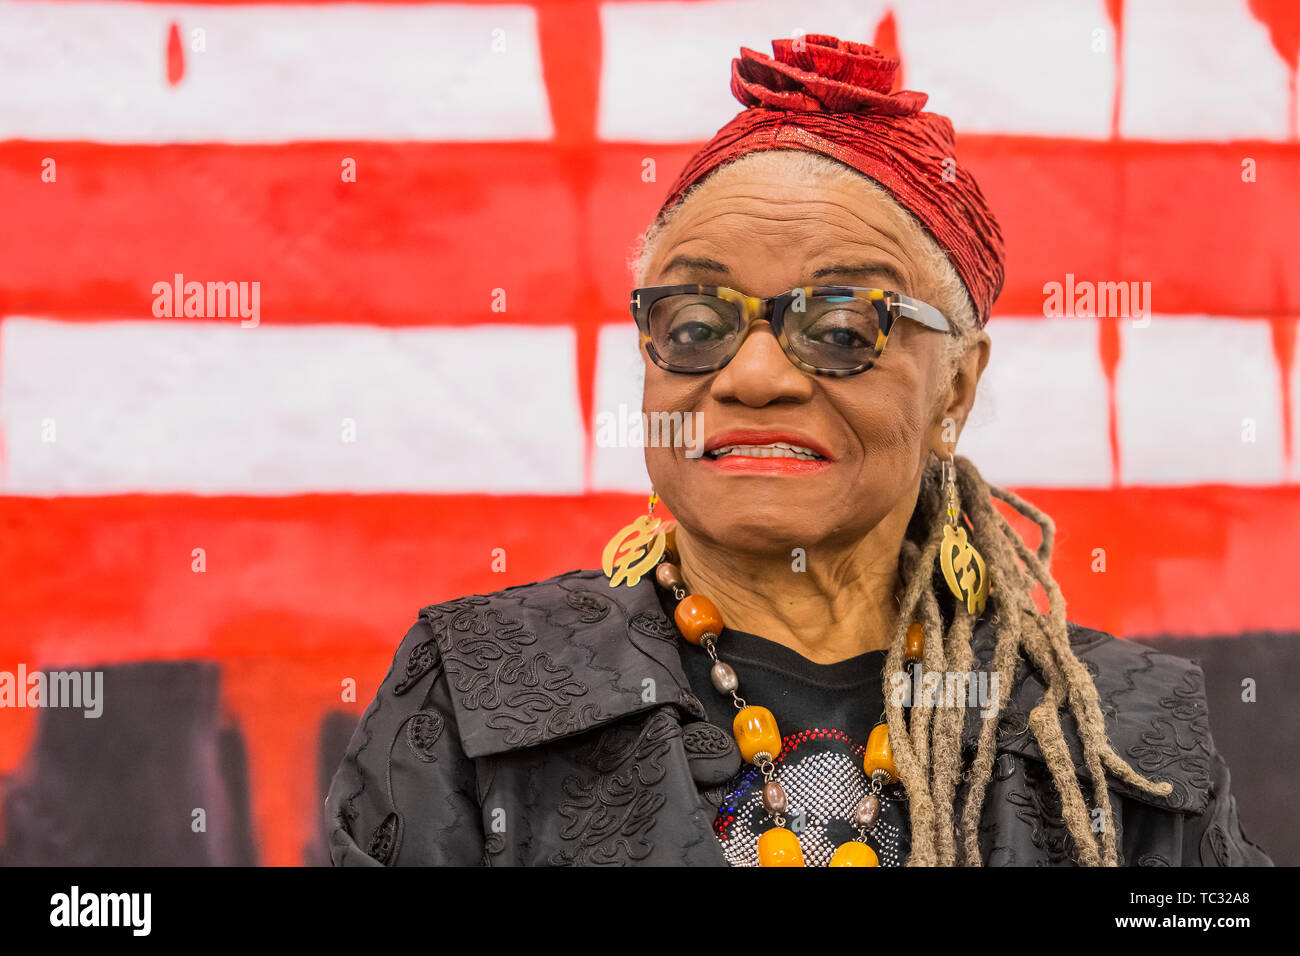 London, UK. 05th June, 2019. Faith Ringgold with The American Collection  #6: The Flag is Bleeding #2, 1997 - The work of Faith Ringgold (b. 1930,  Harlem, New York) is celebrated in